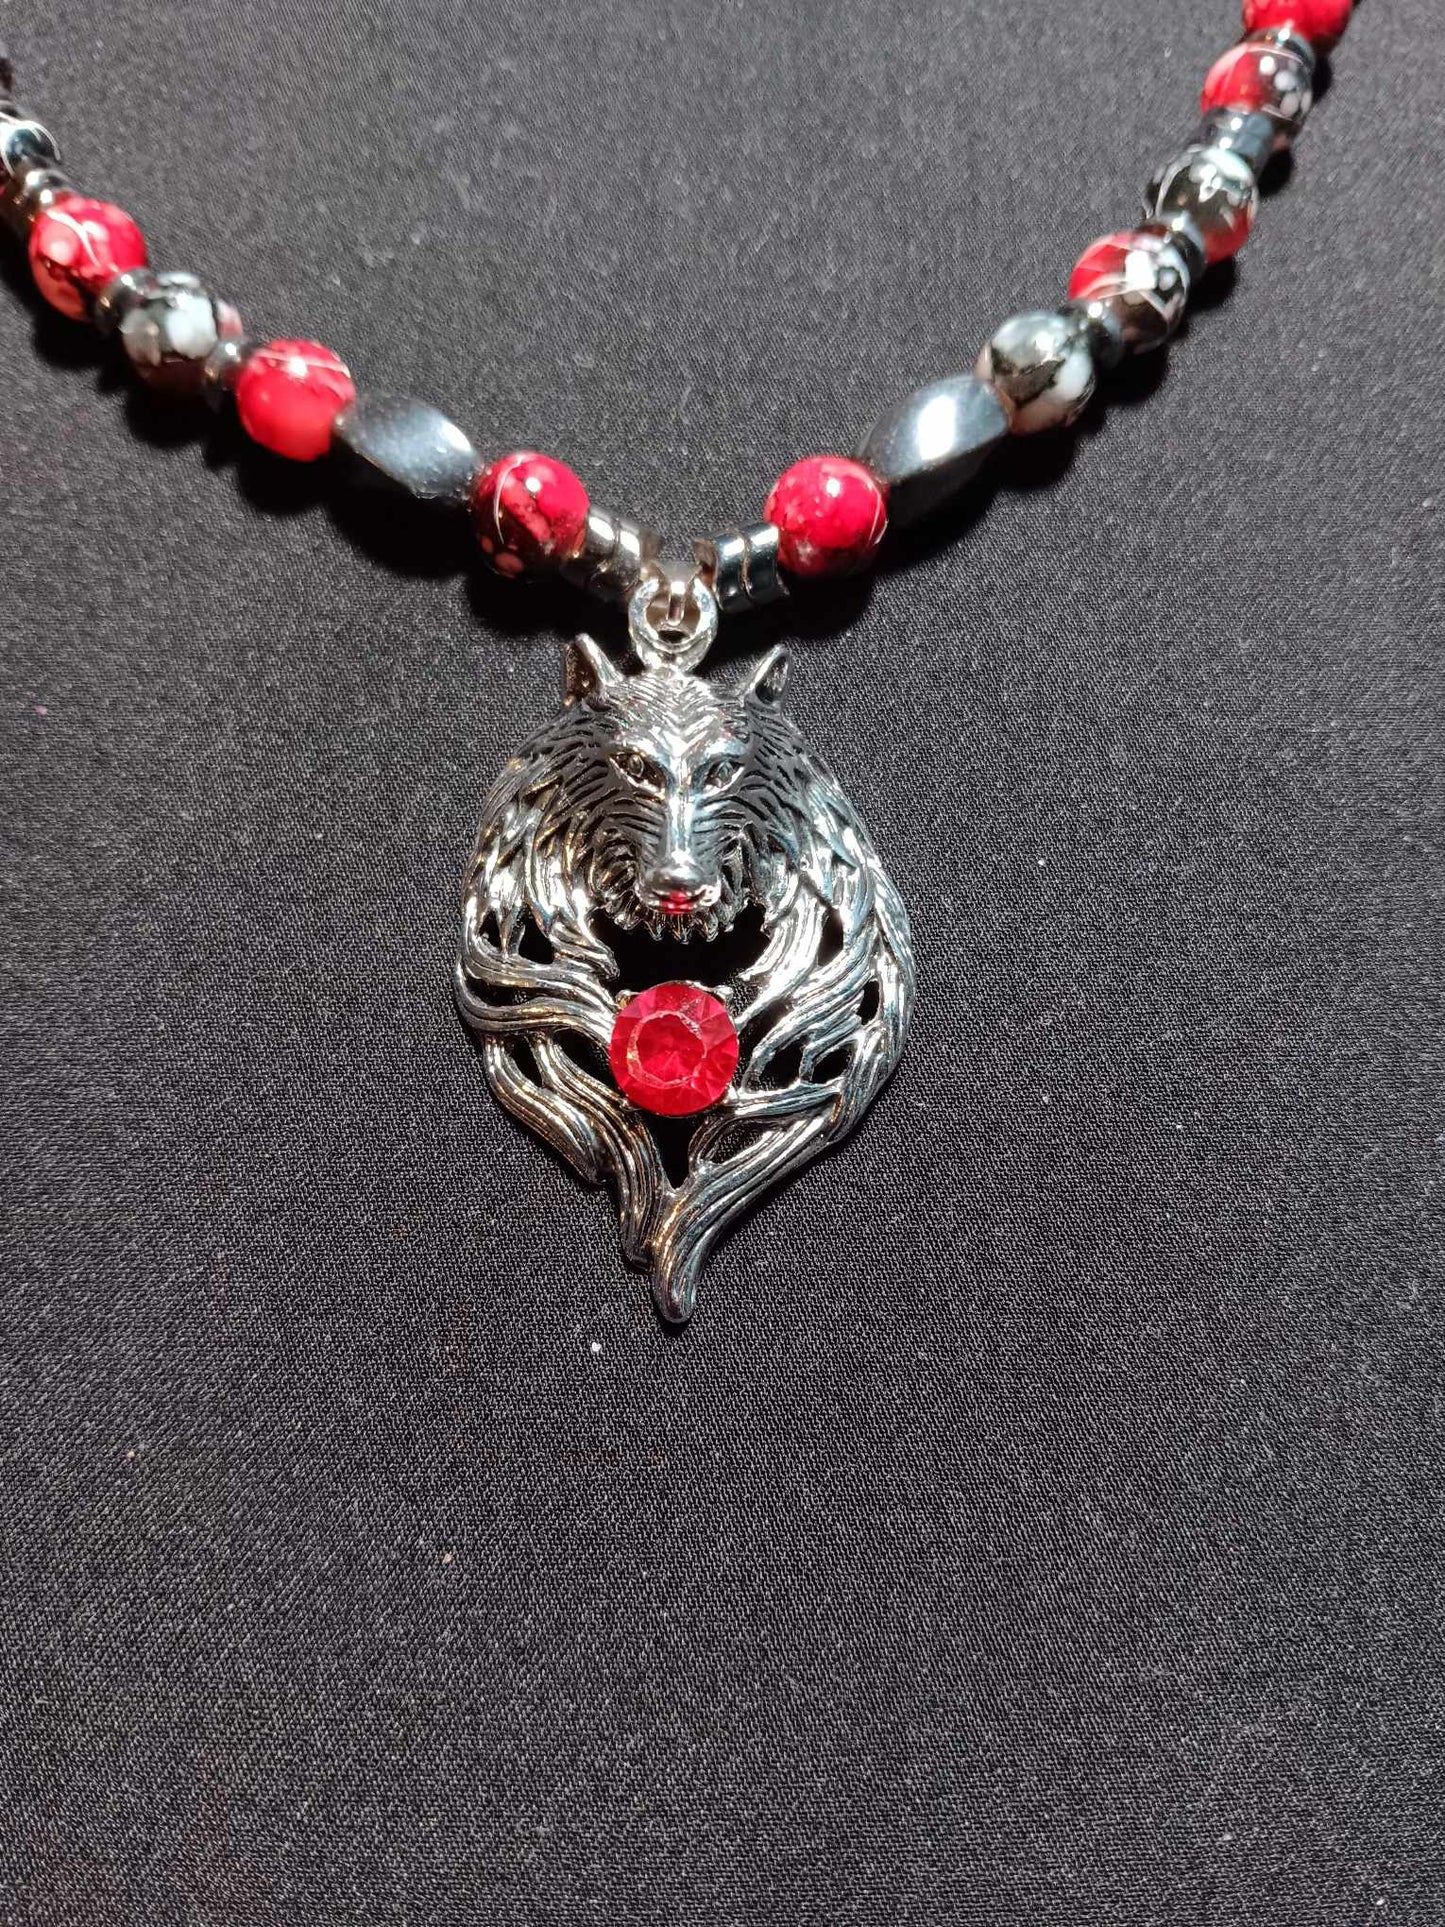 Red and Black Beaded Necklace with Wolf Pendant